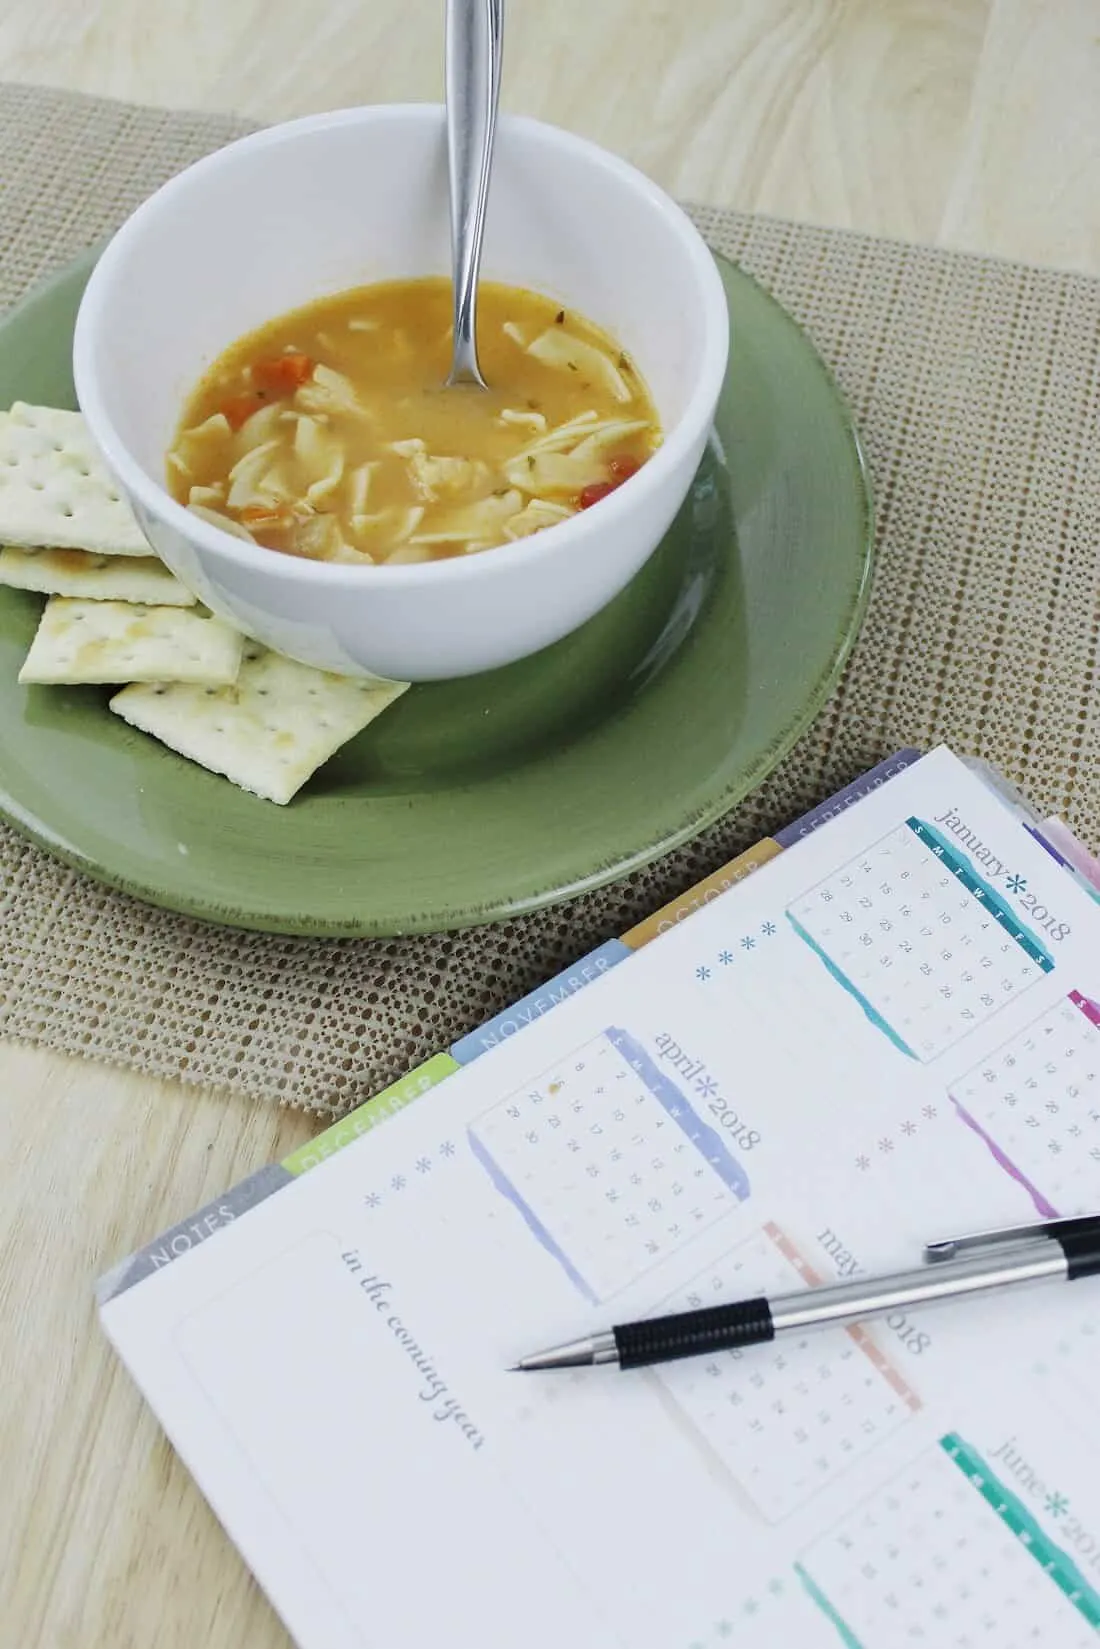 Soup and crackers next to planner and pen.